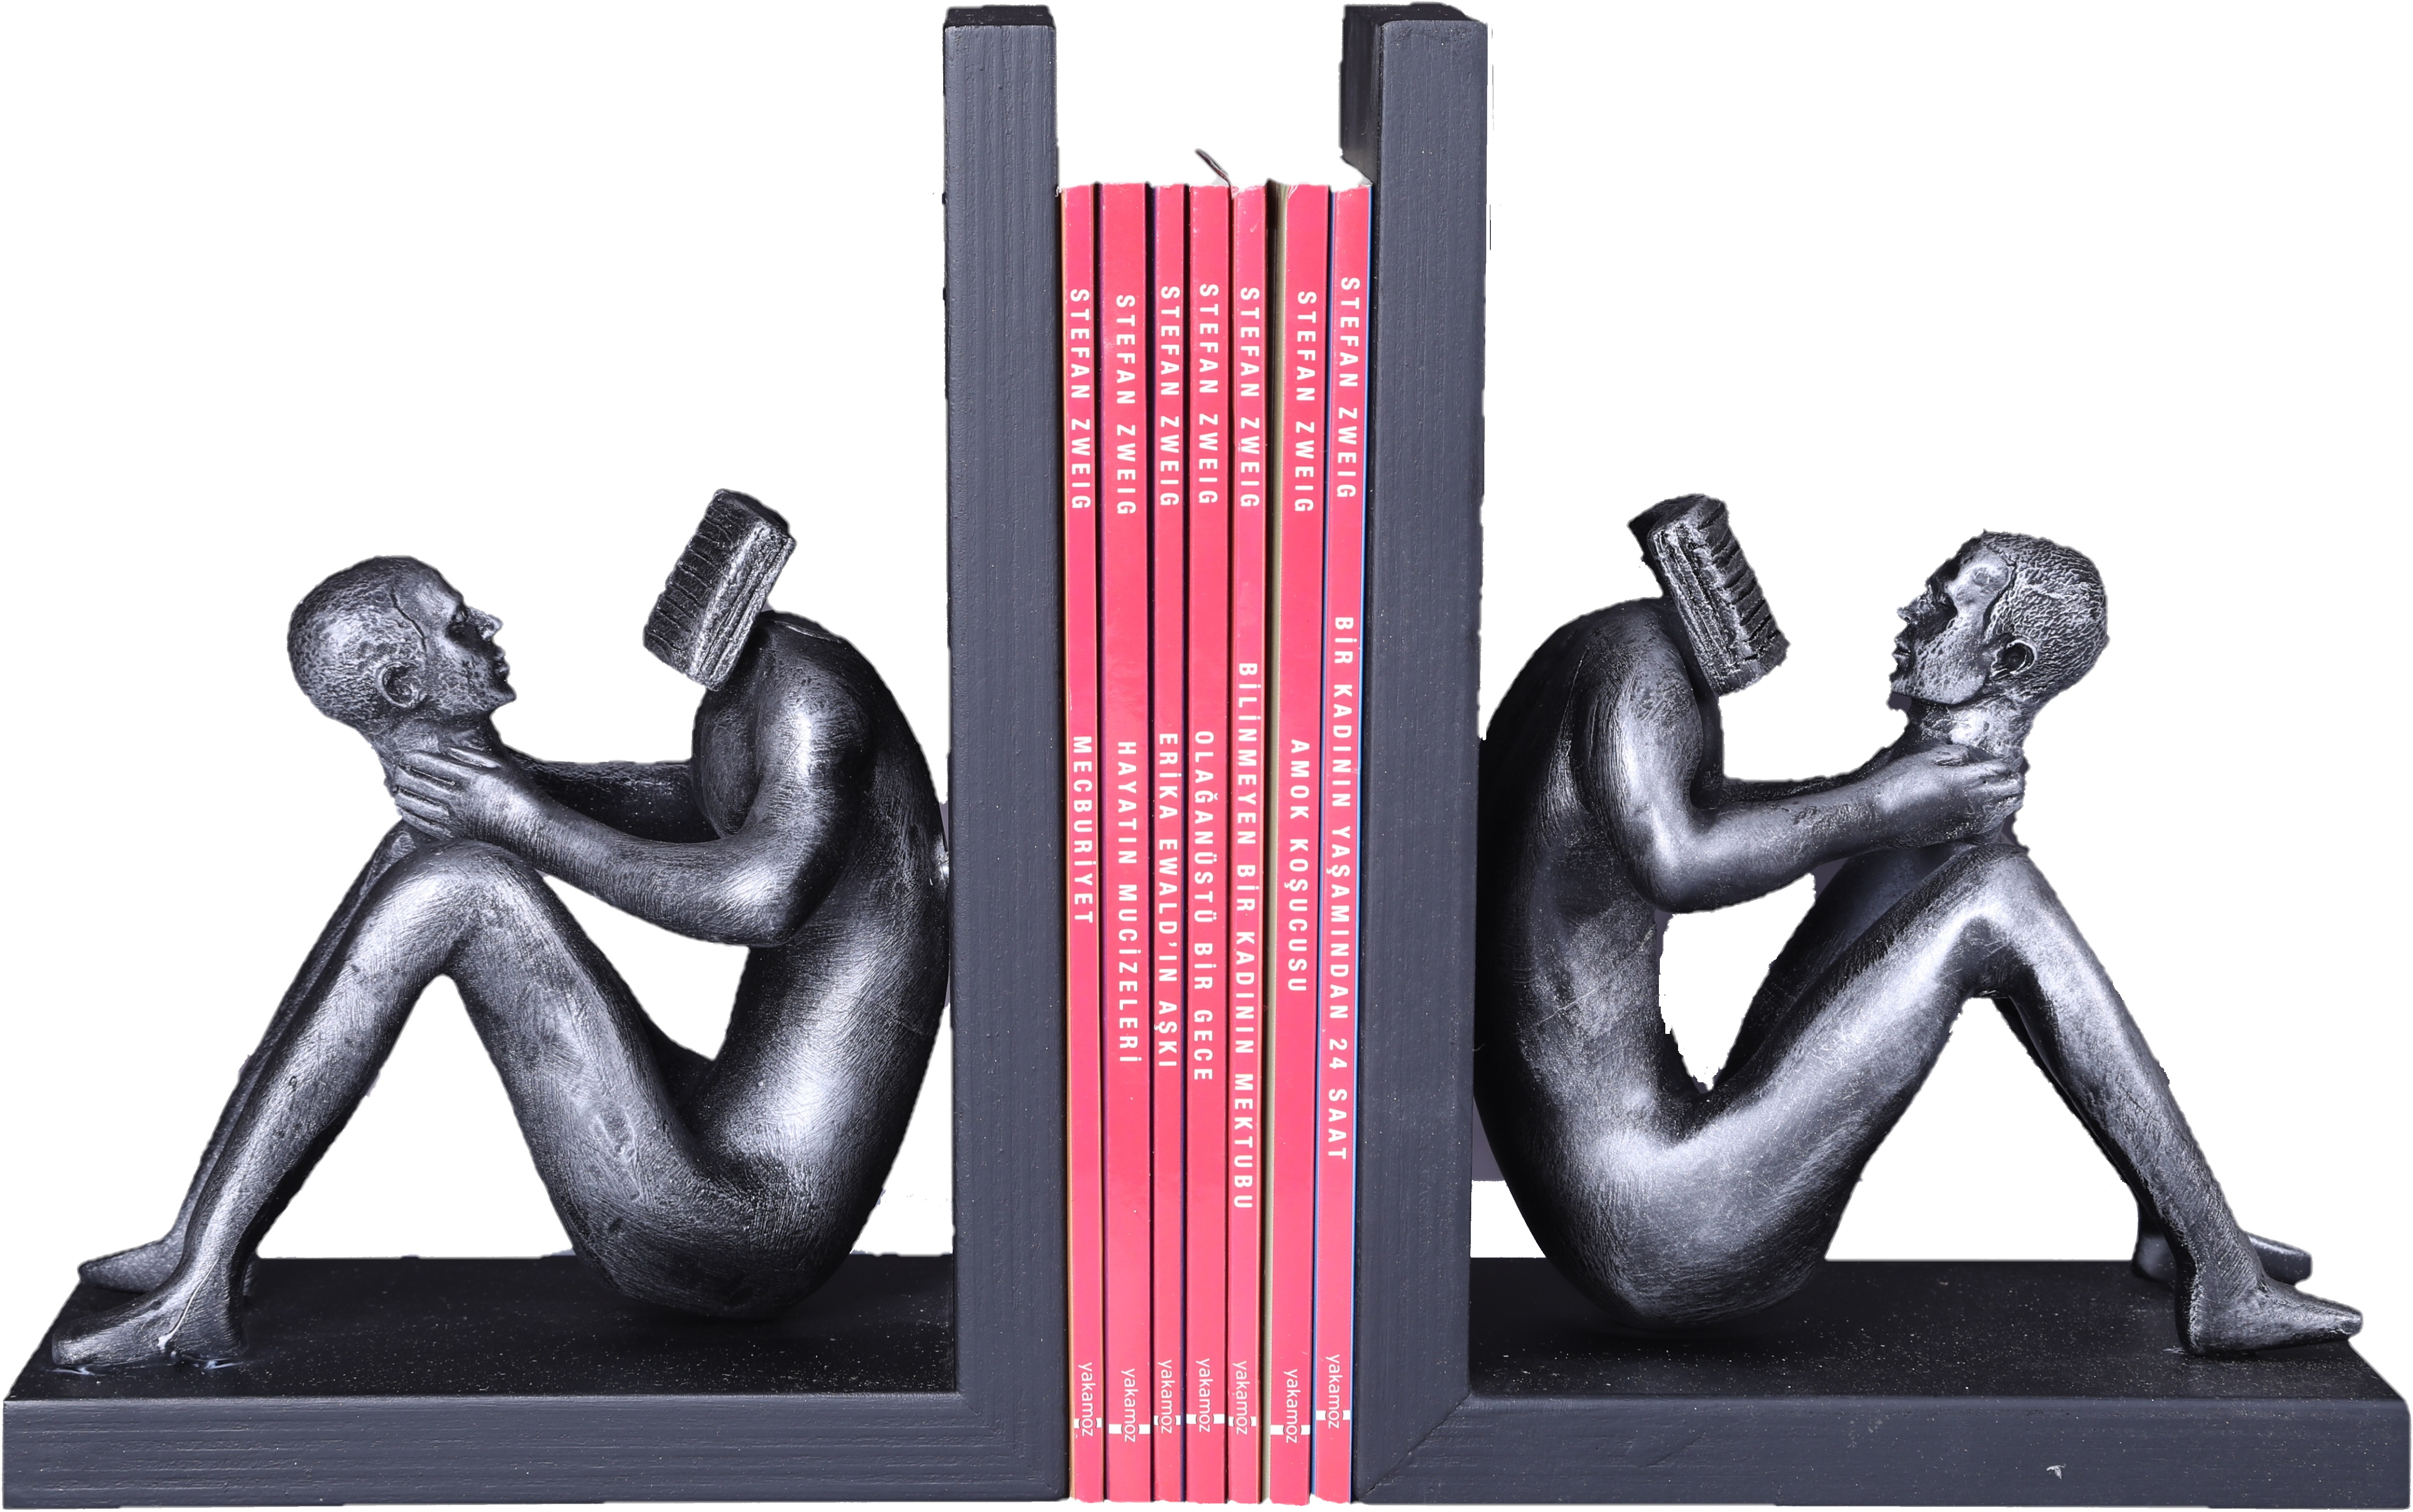 BOOK HOLDER SPECIAL DESIGN OF HUMAN READING ITSELF